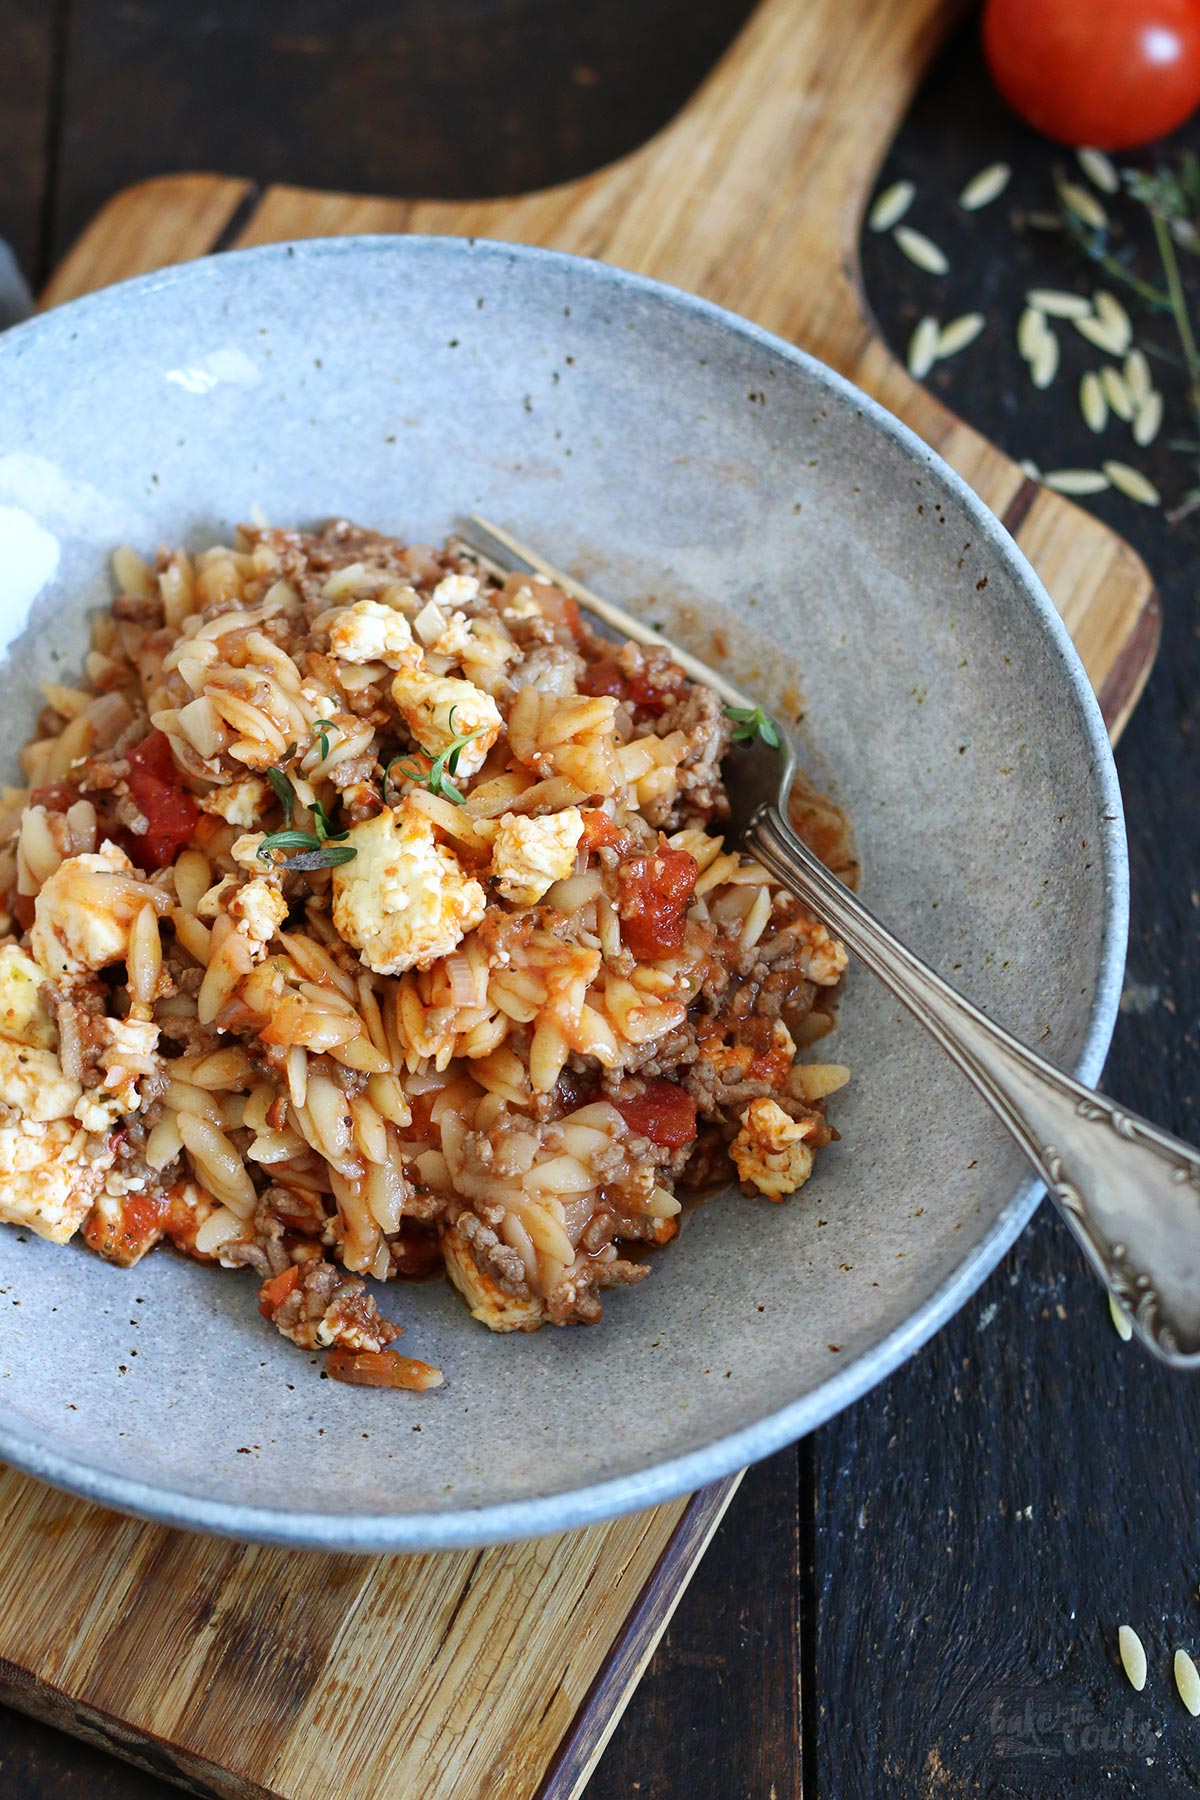 Greek Baked Orzo with Feta | Bake to the roots